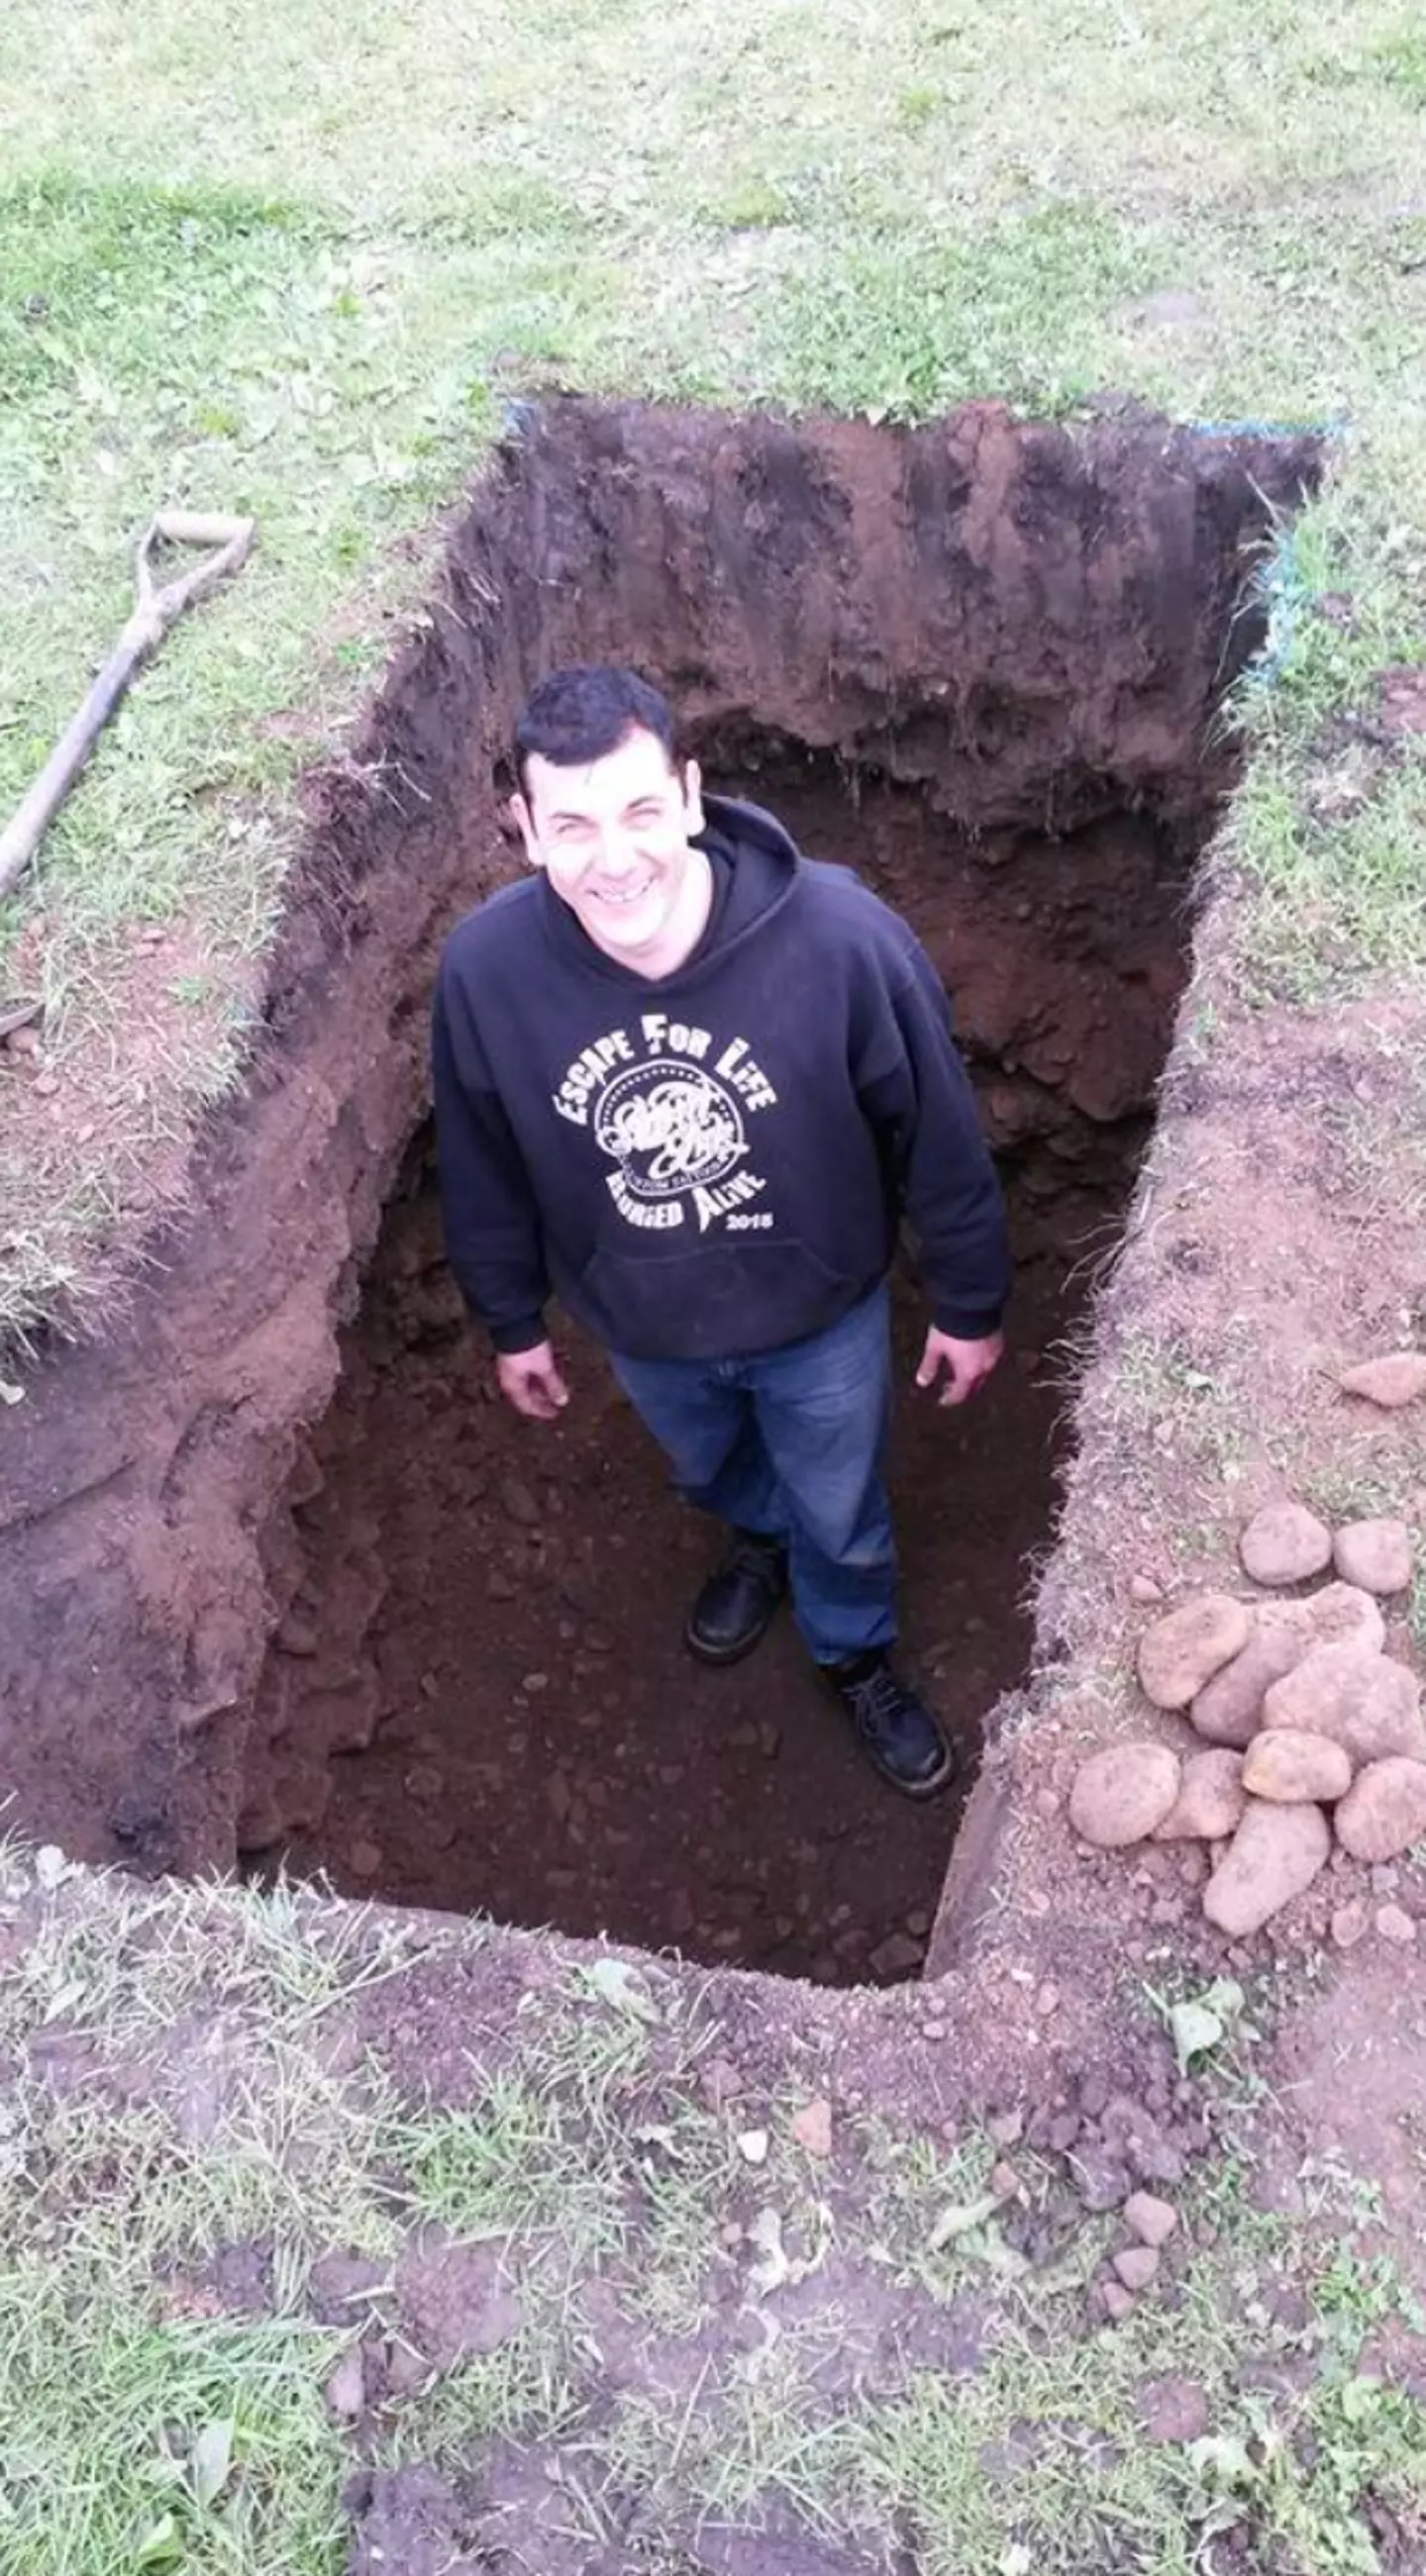 Antony Britton attempted to escape from six feet of soil while handcuffed.